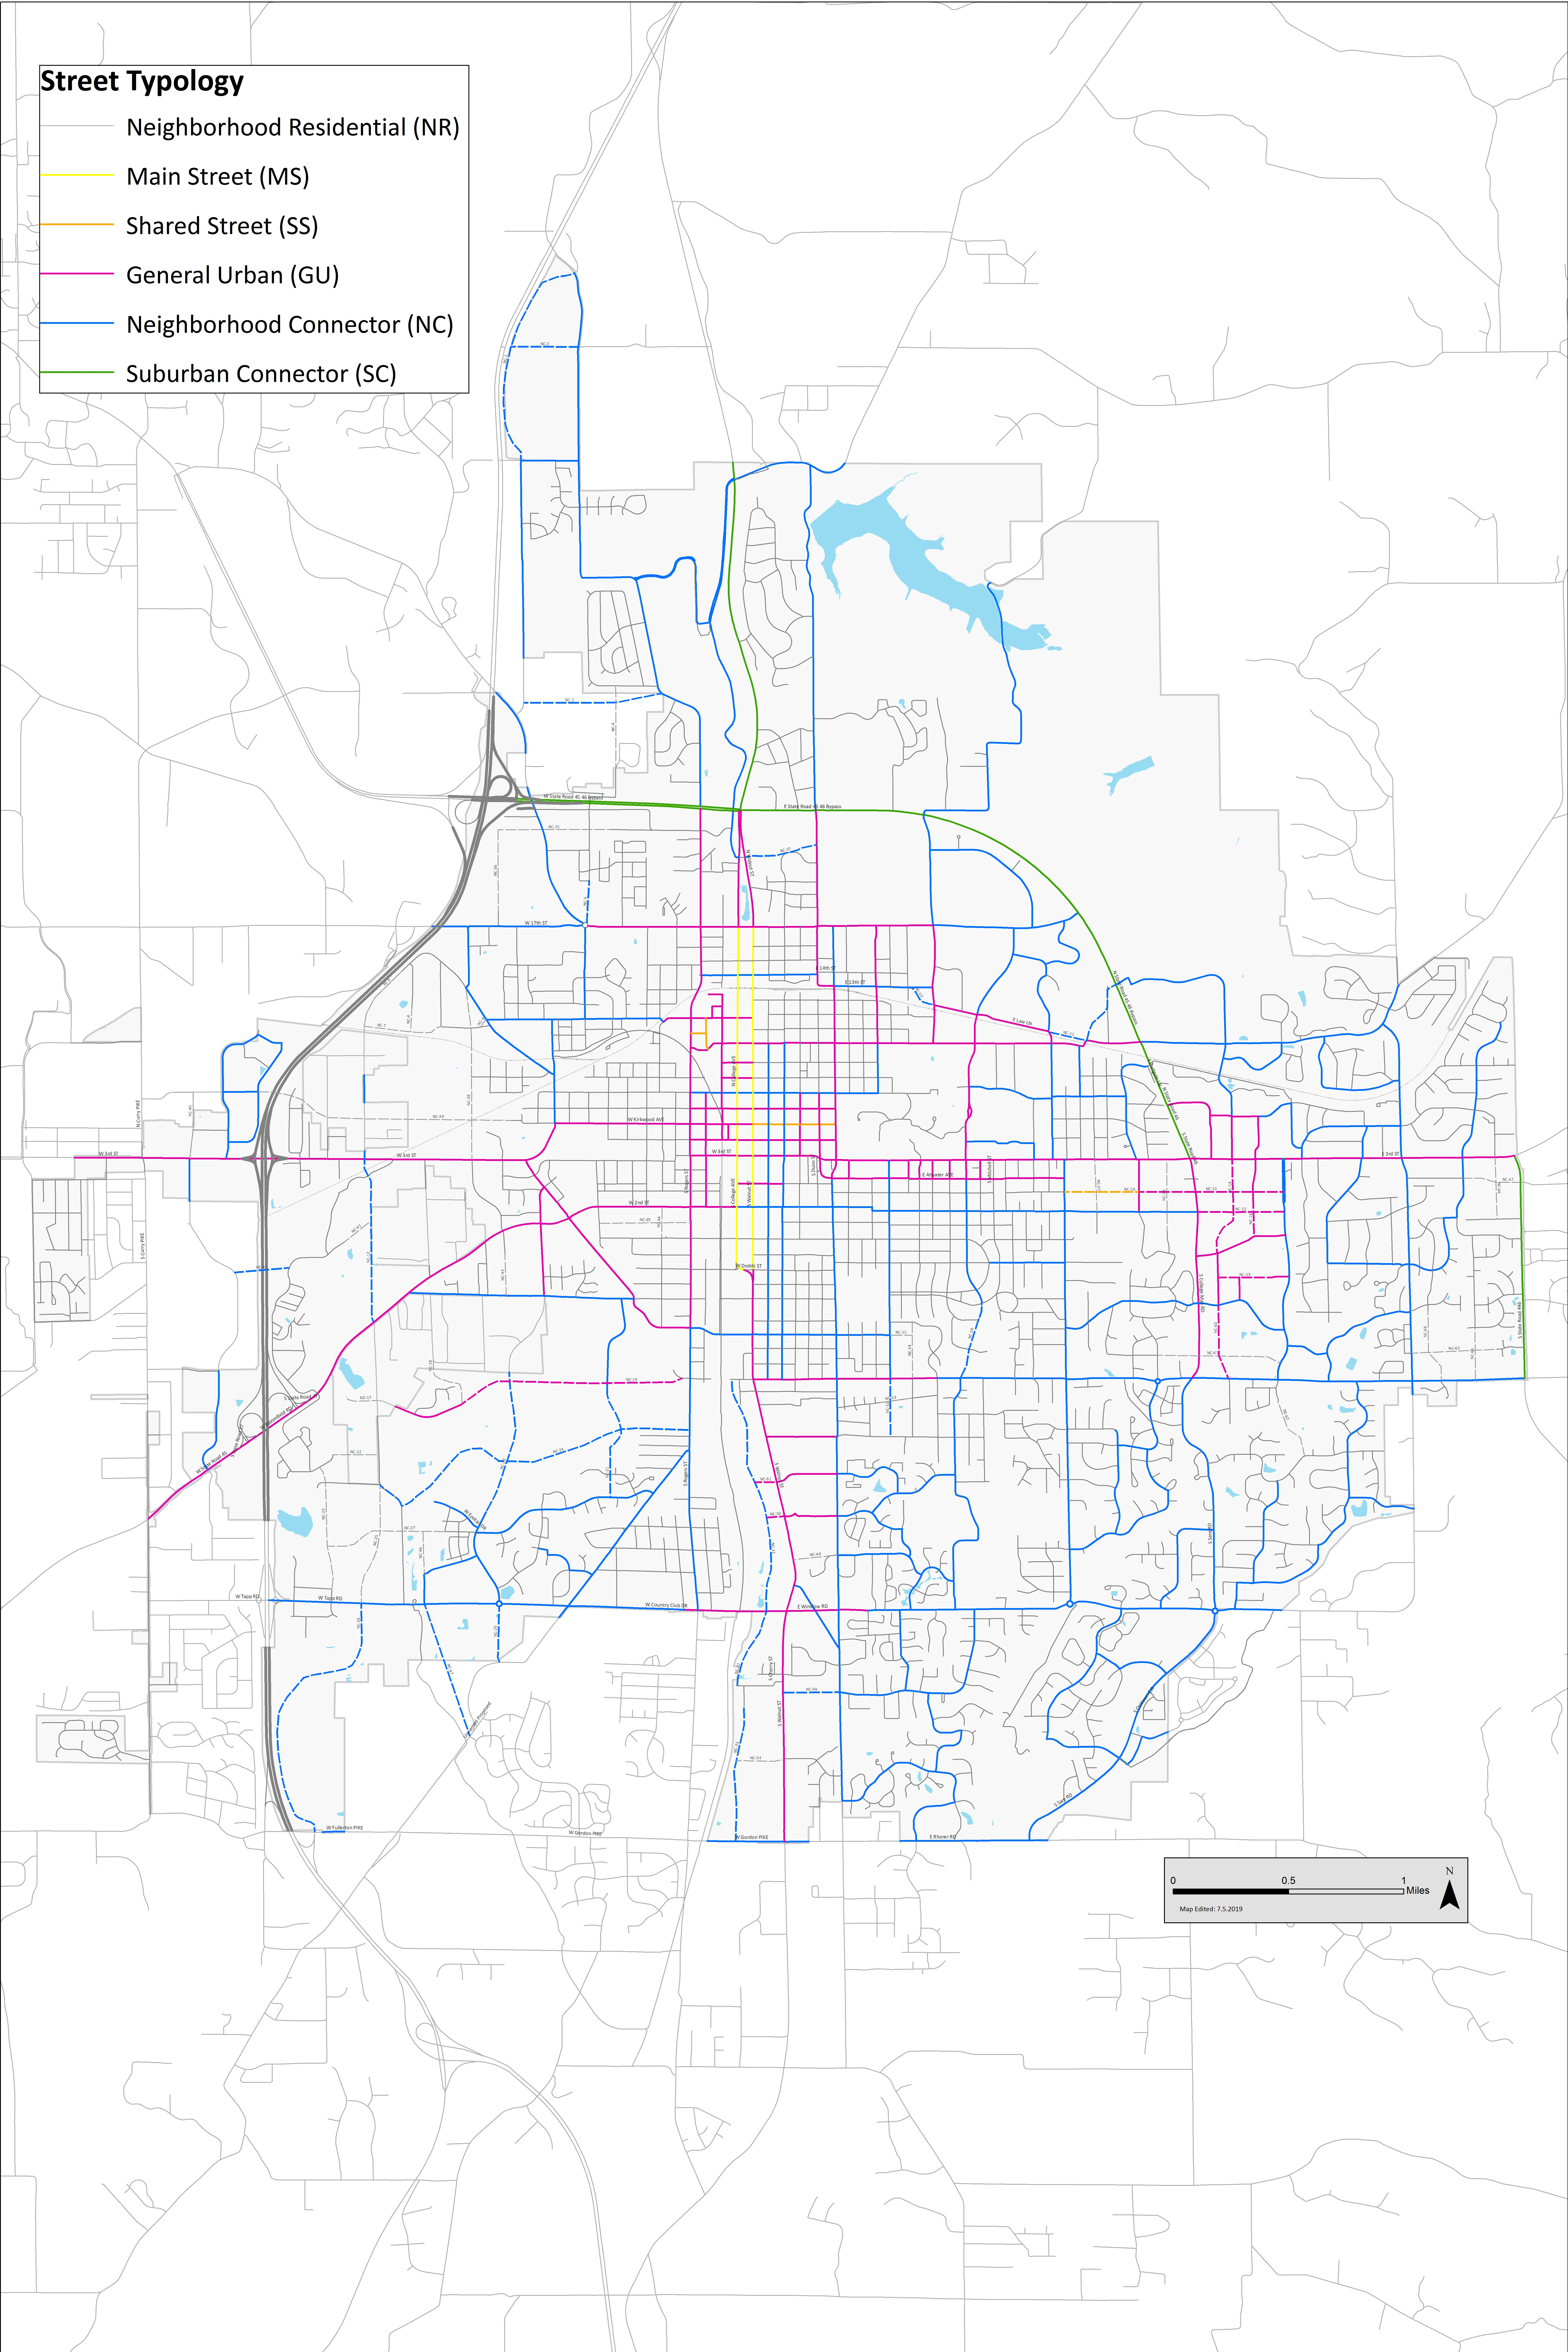 City of Bloomington Transportation Plan - Figure 19 - Street Typologies and New Connections